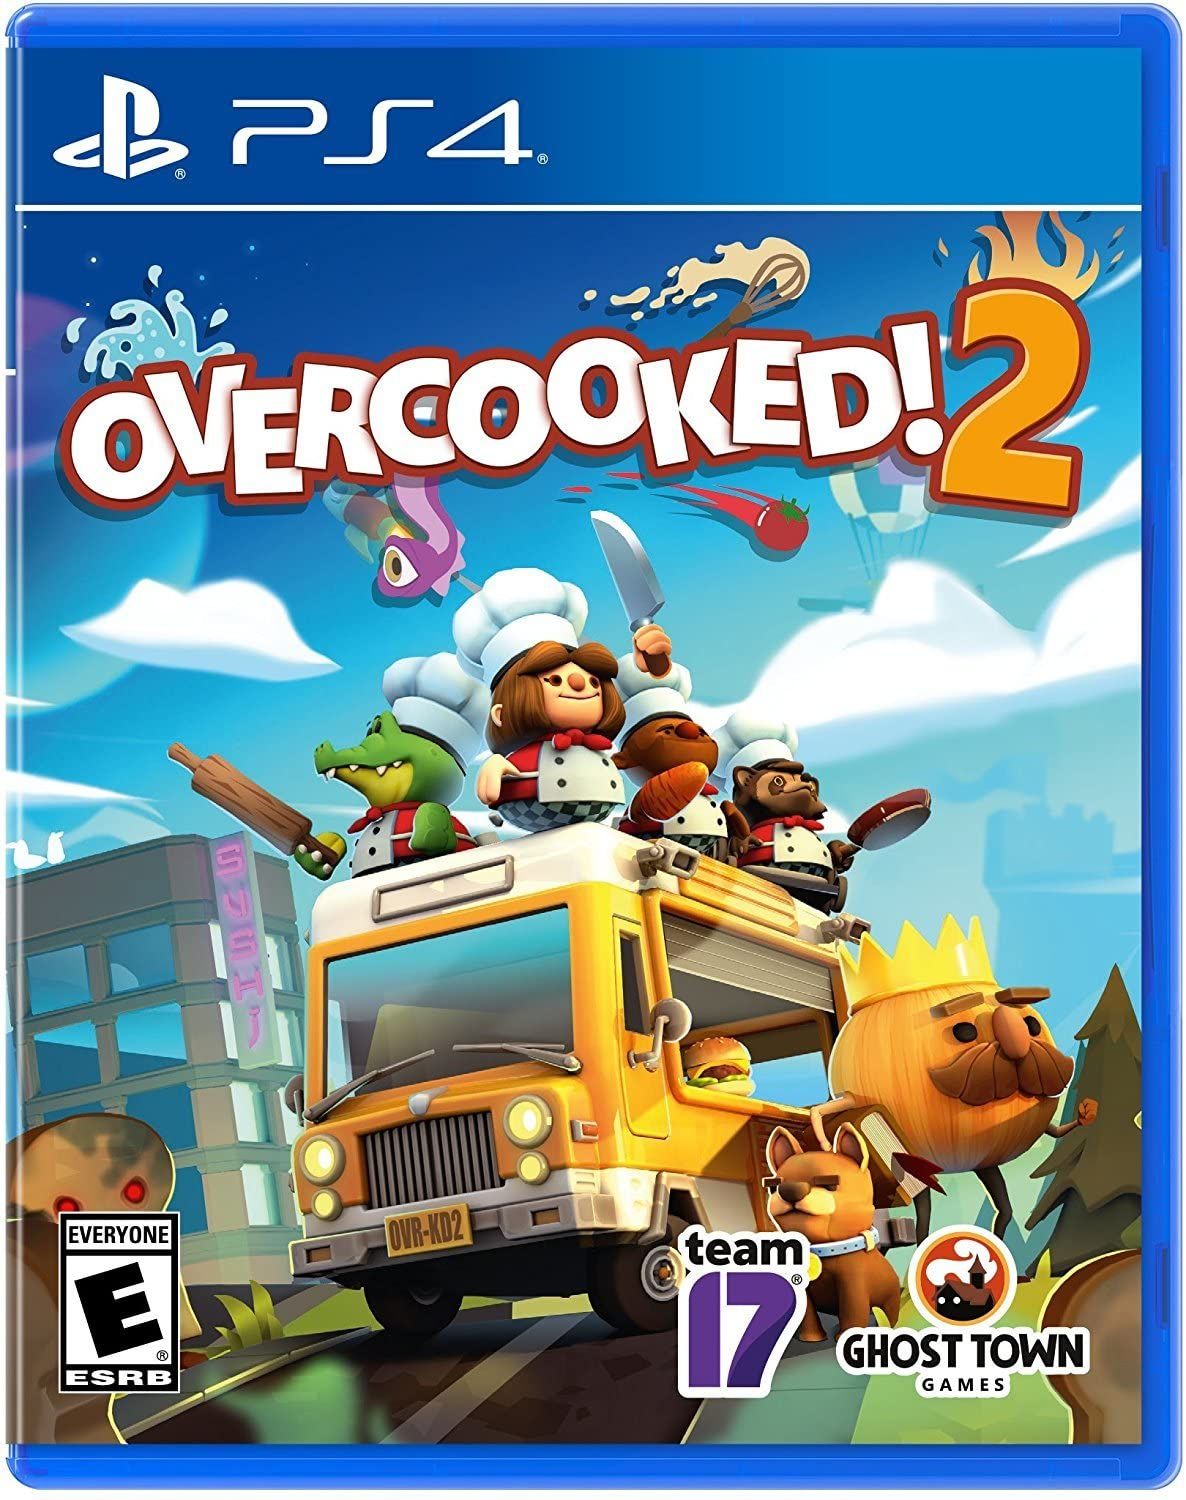 A group of chefs prepare food from a food truck in the cover art for Overcooked! 2